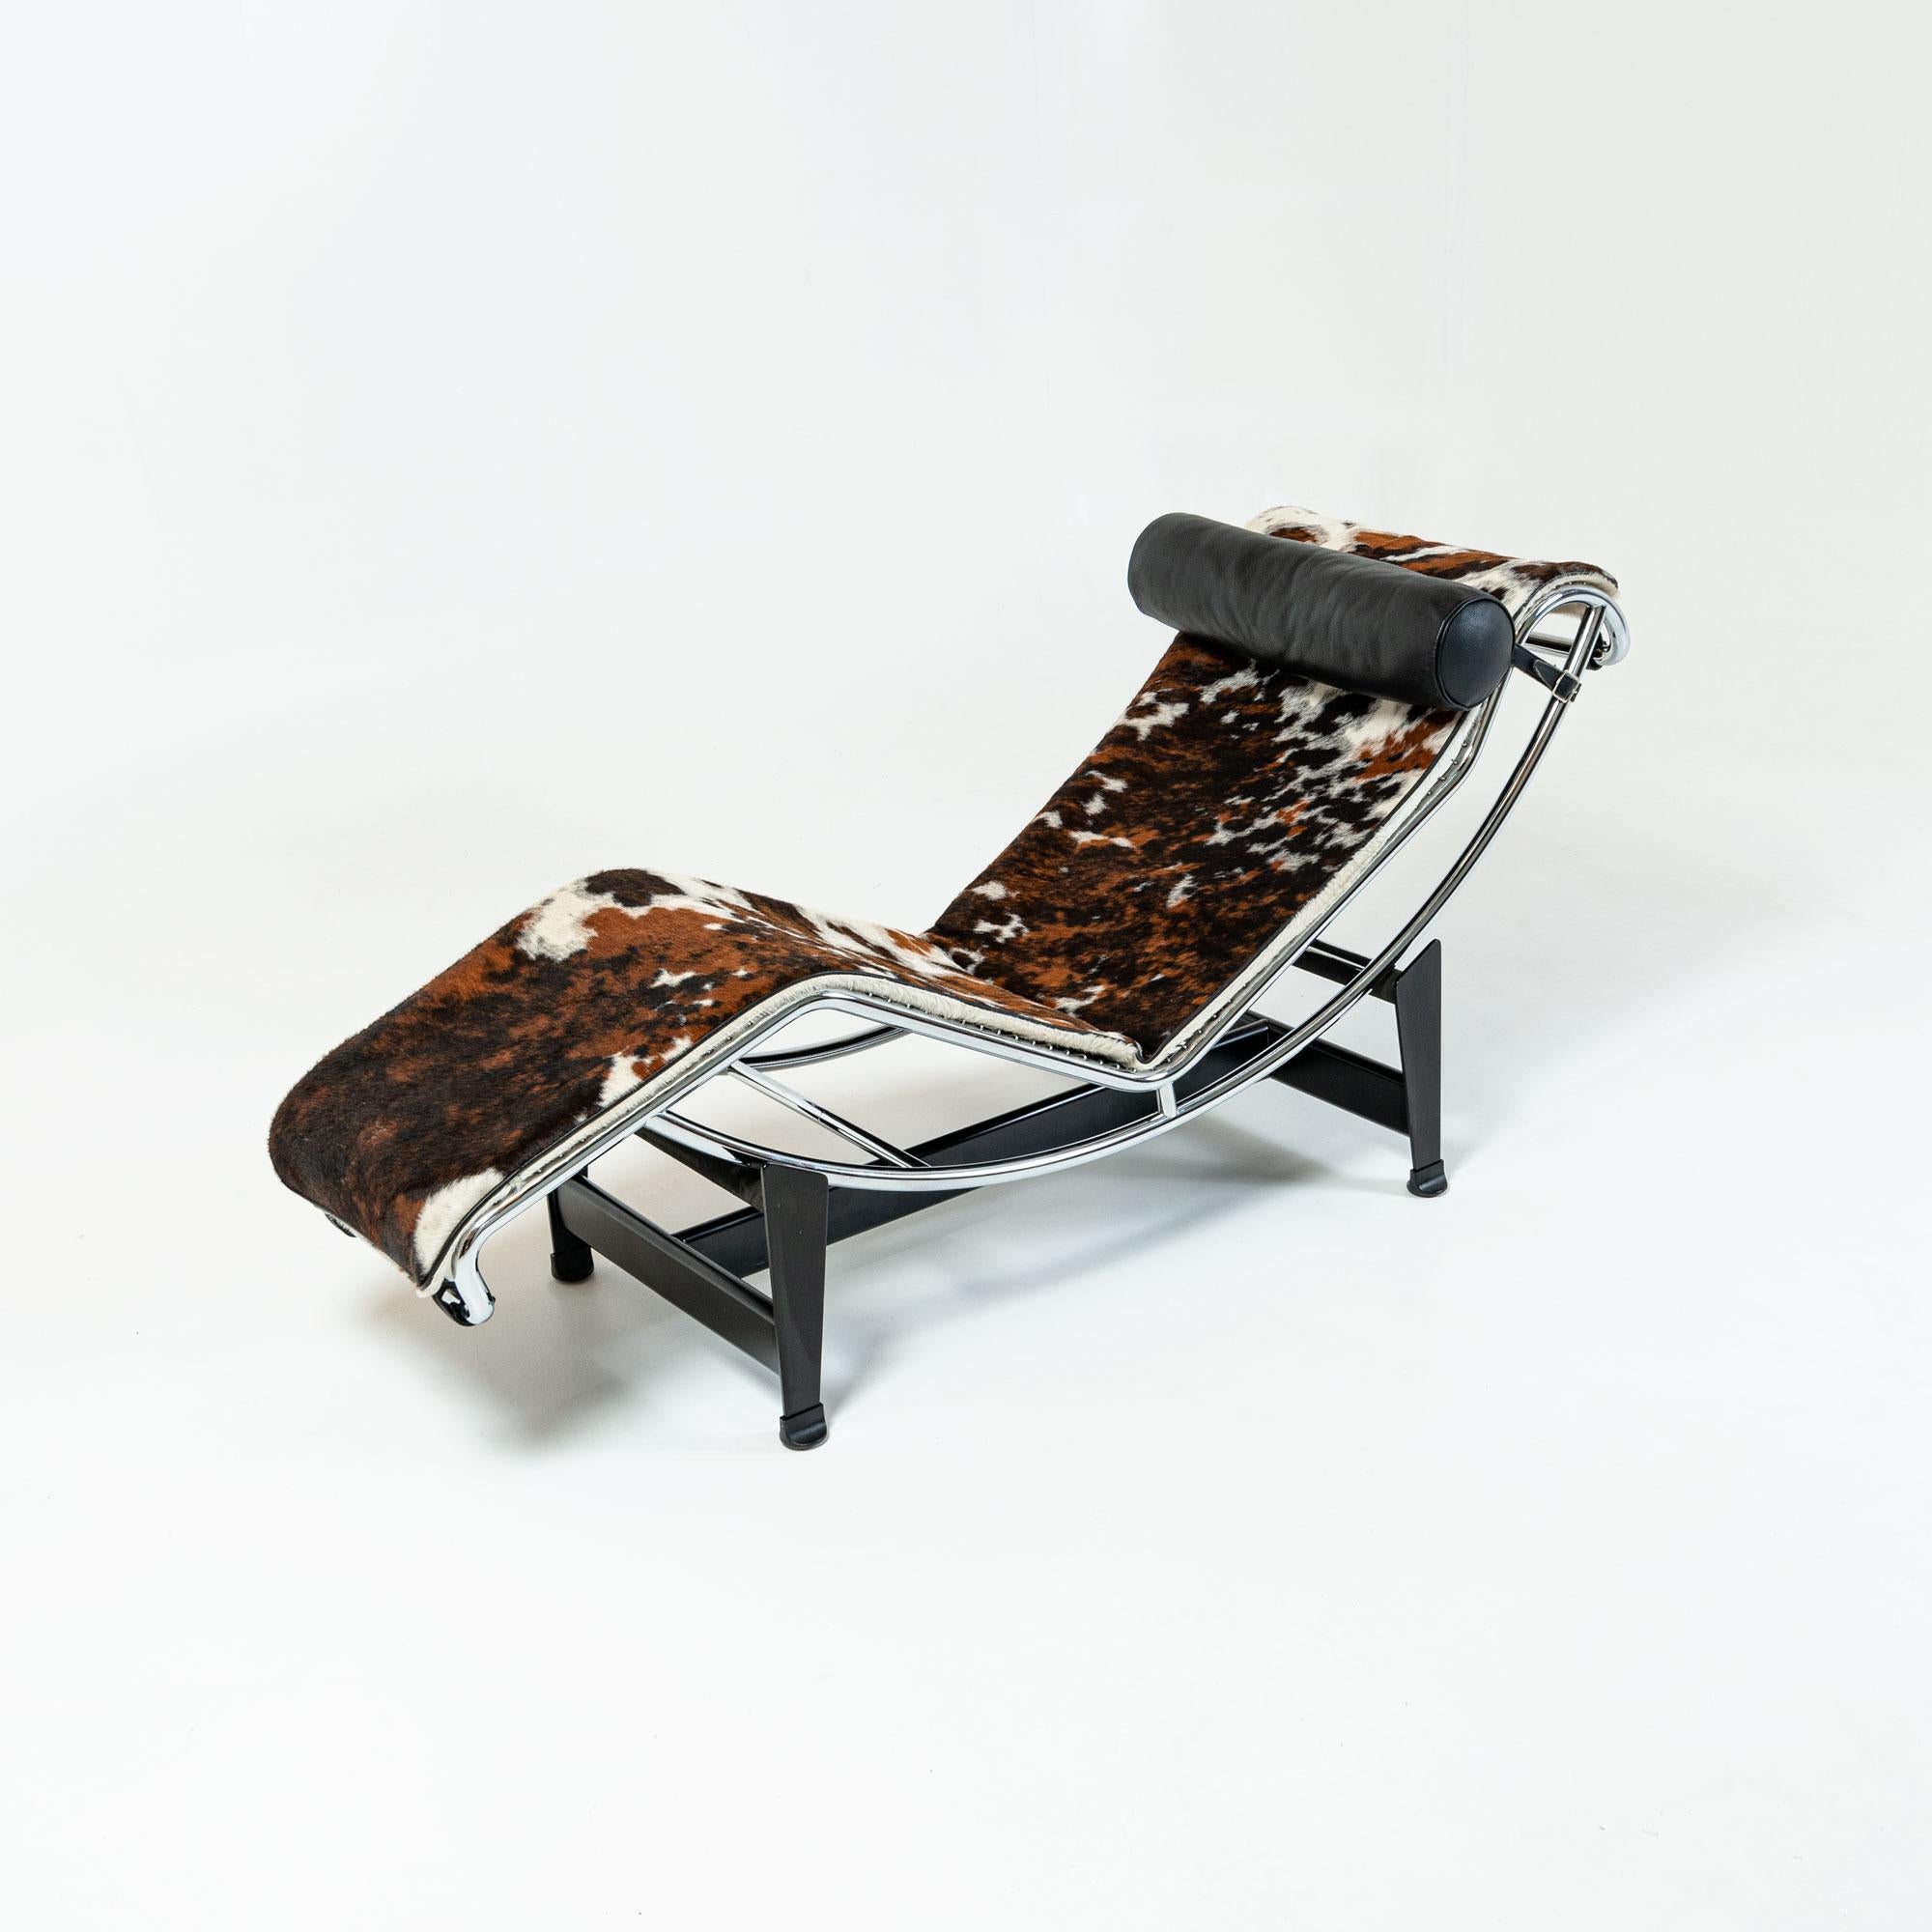 Bauhaus Le Corbusier for Cassina Lc4 Chaise Lounge in Tri-Color Hide Signed and Numbered